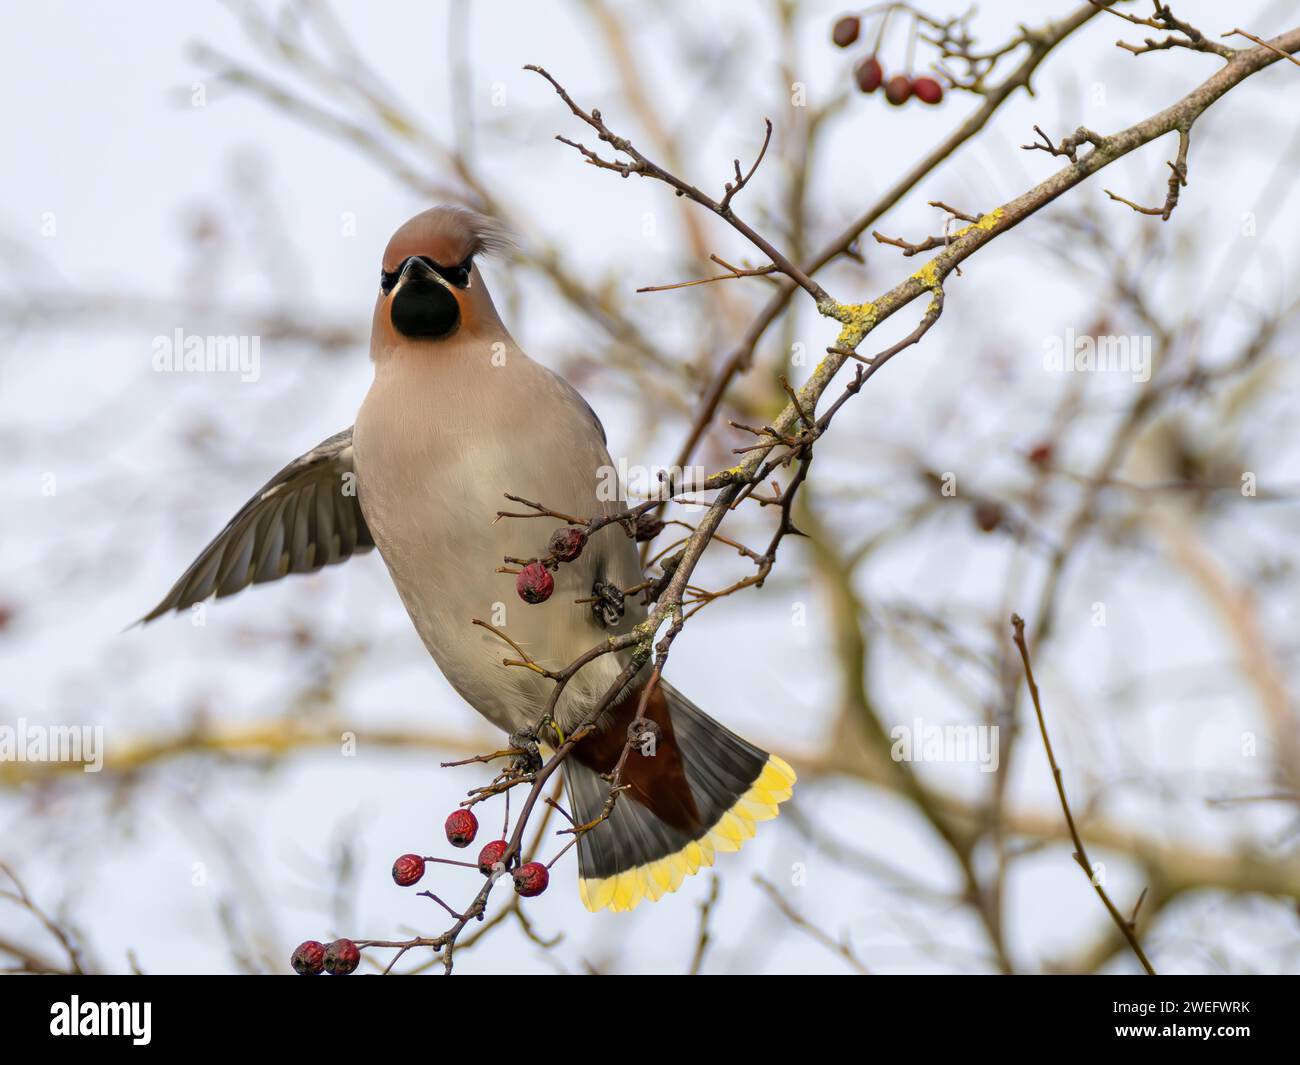 Waxwing, Bombycilla garrulus, perched on tree branch pointing with wing Stock Photo